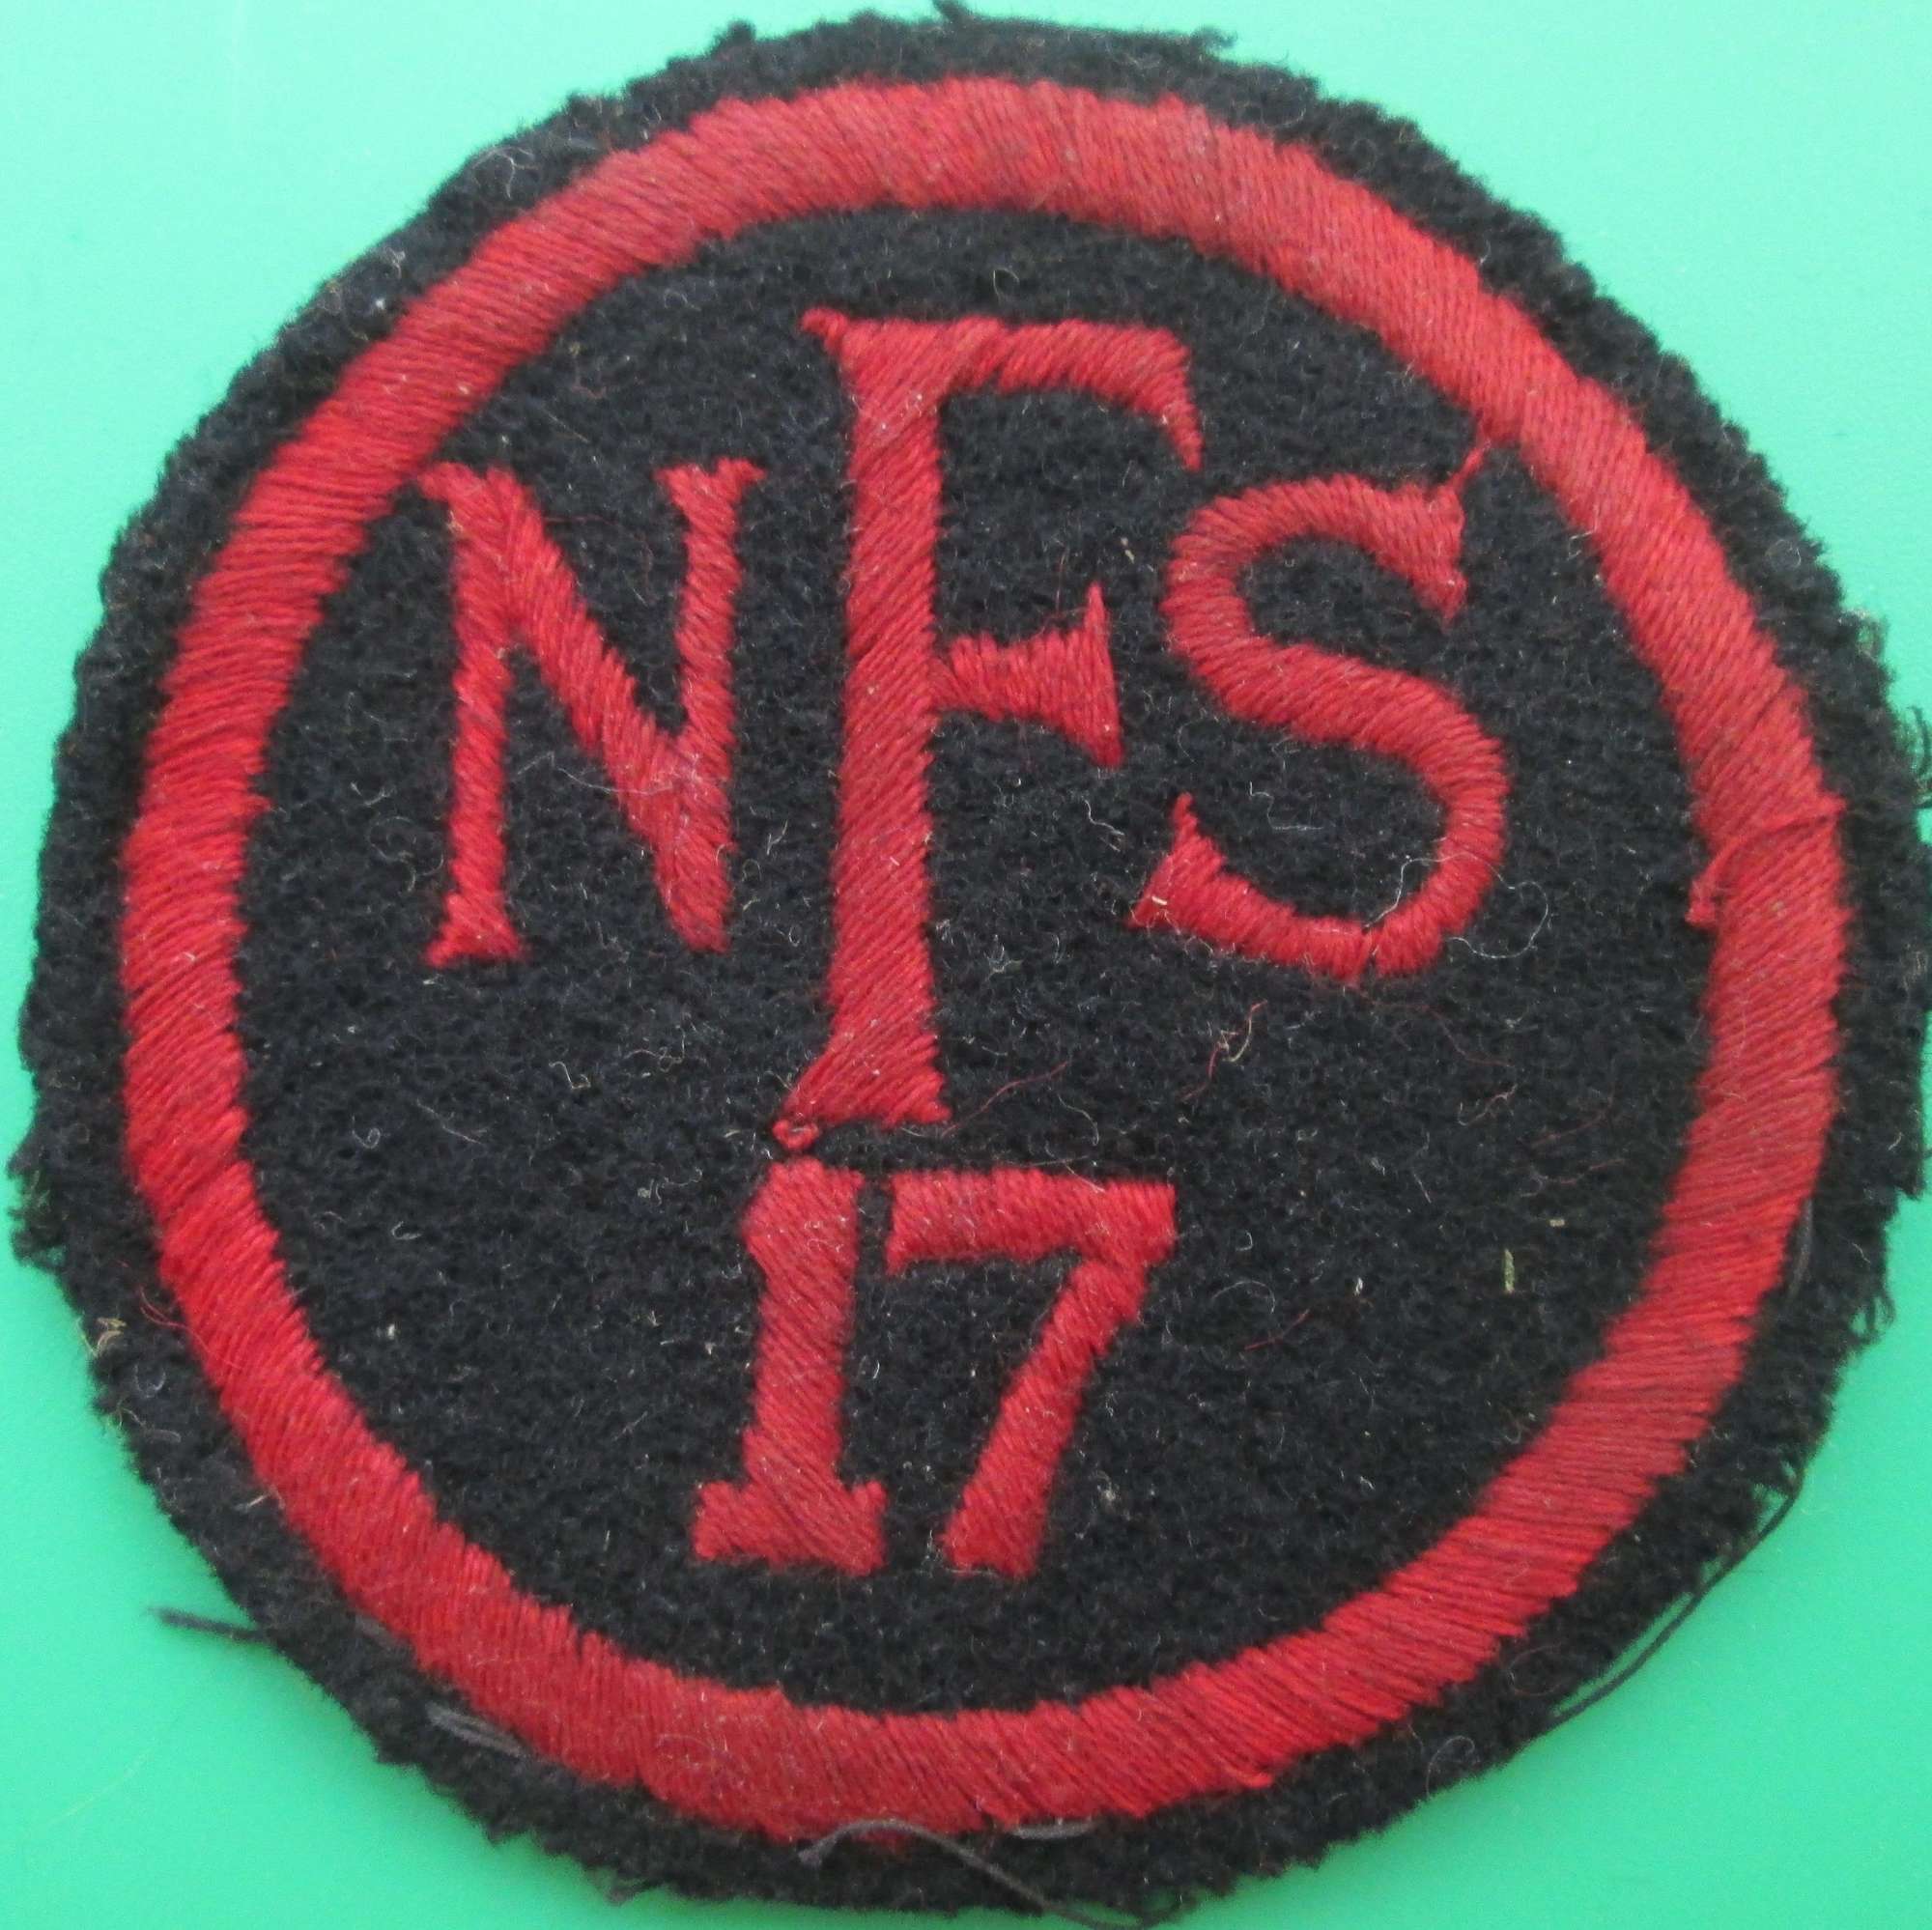 A NATIONAL FIRE SERVICE 17 BADGE